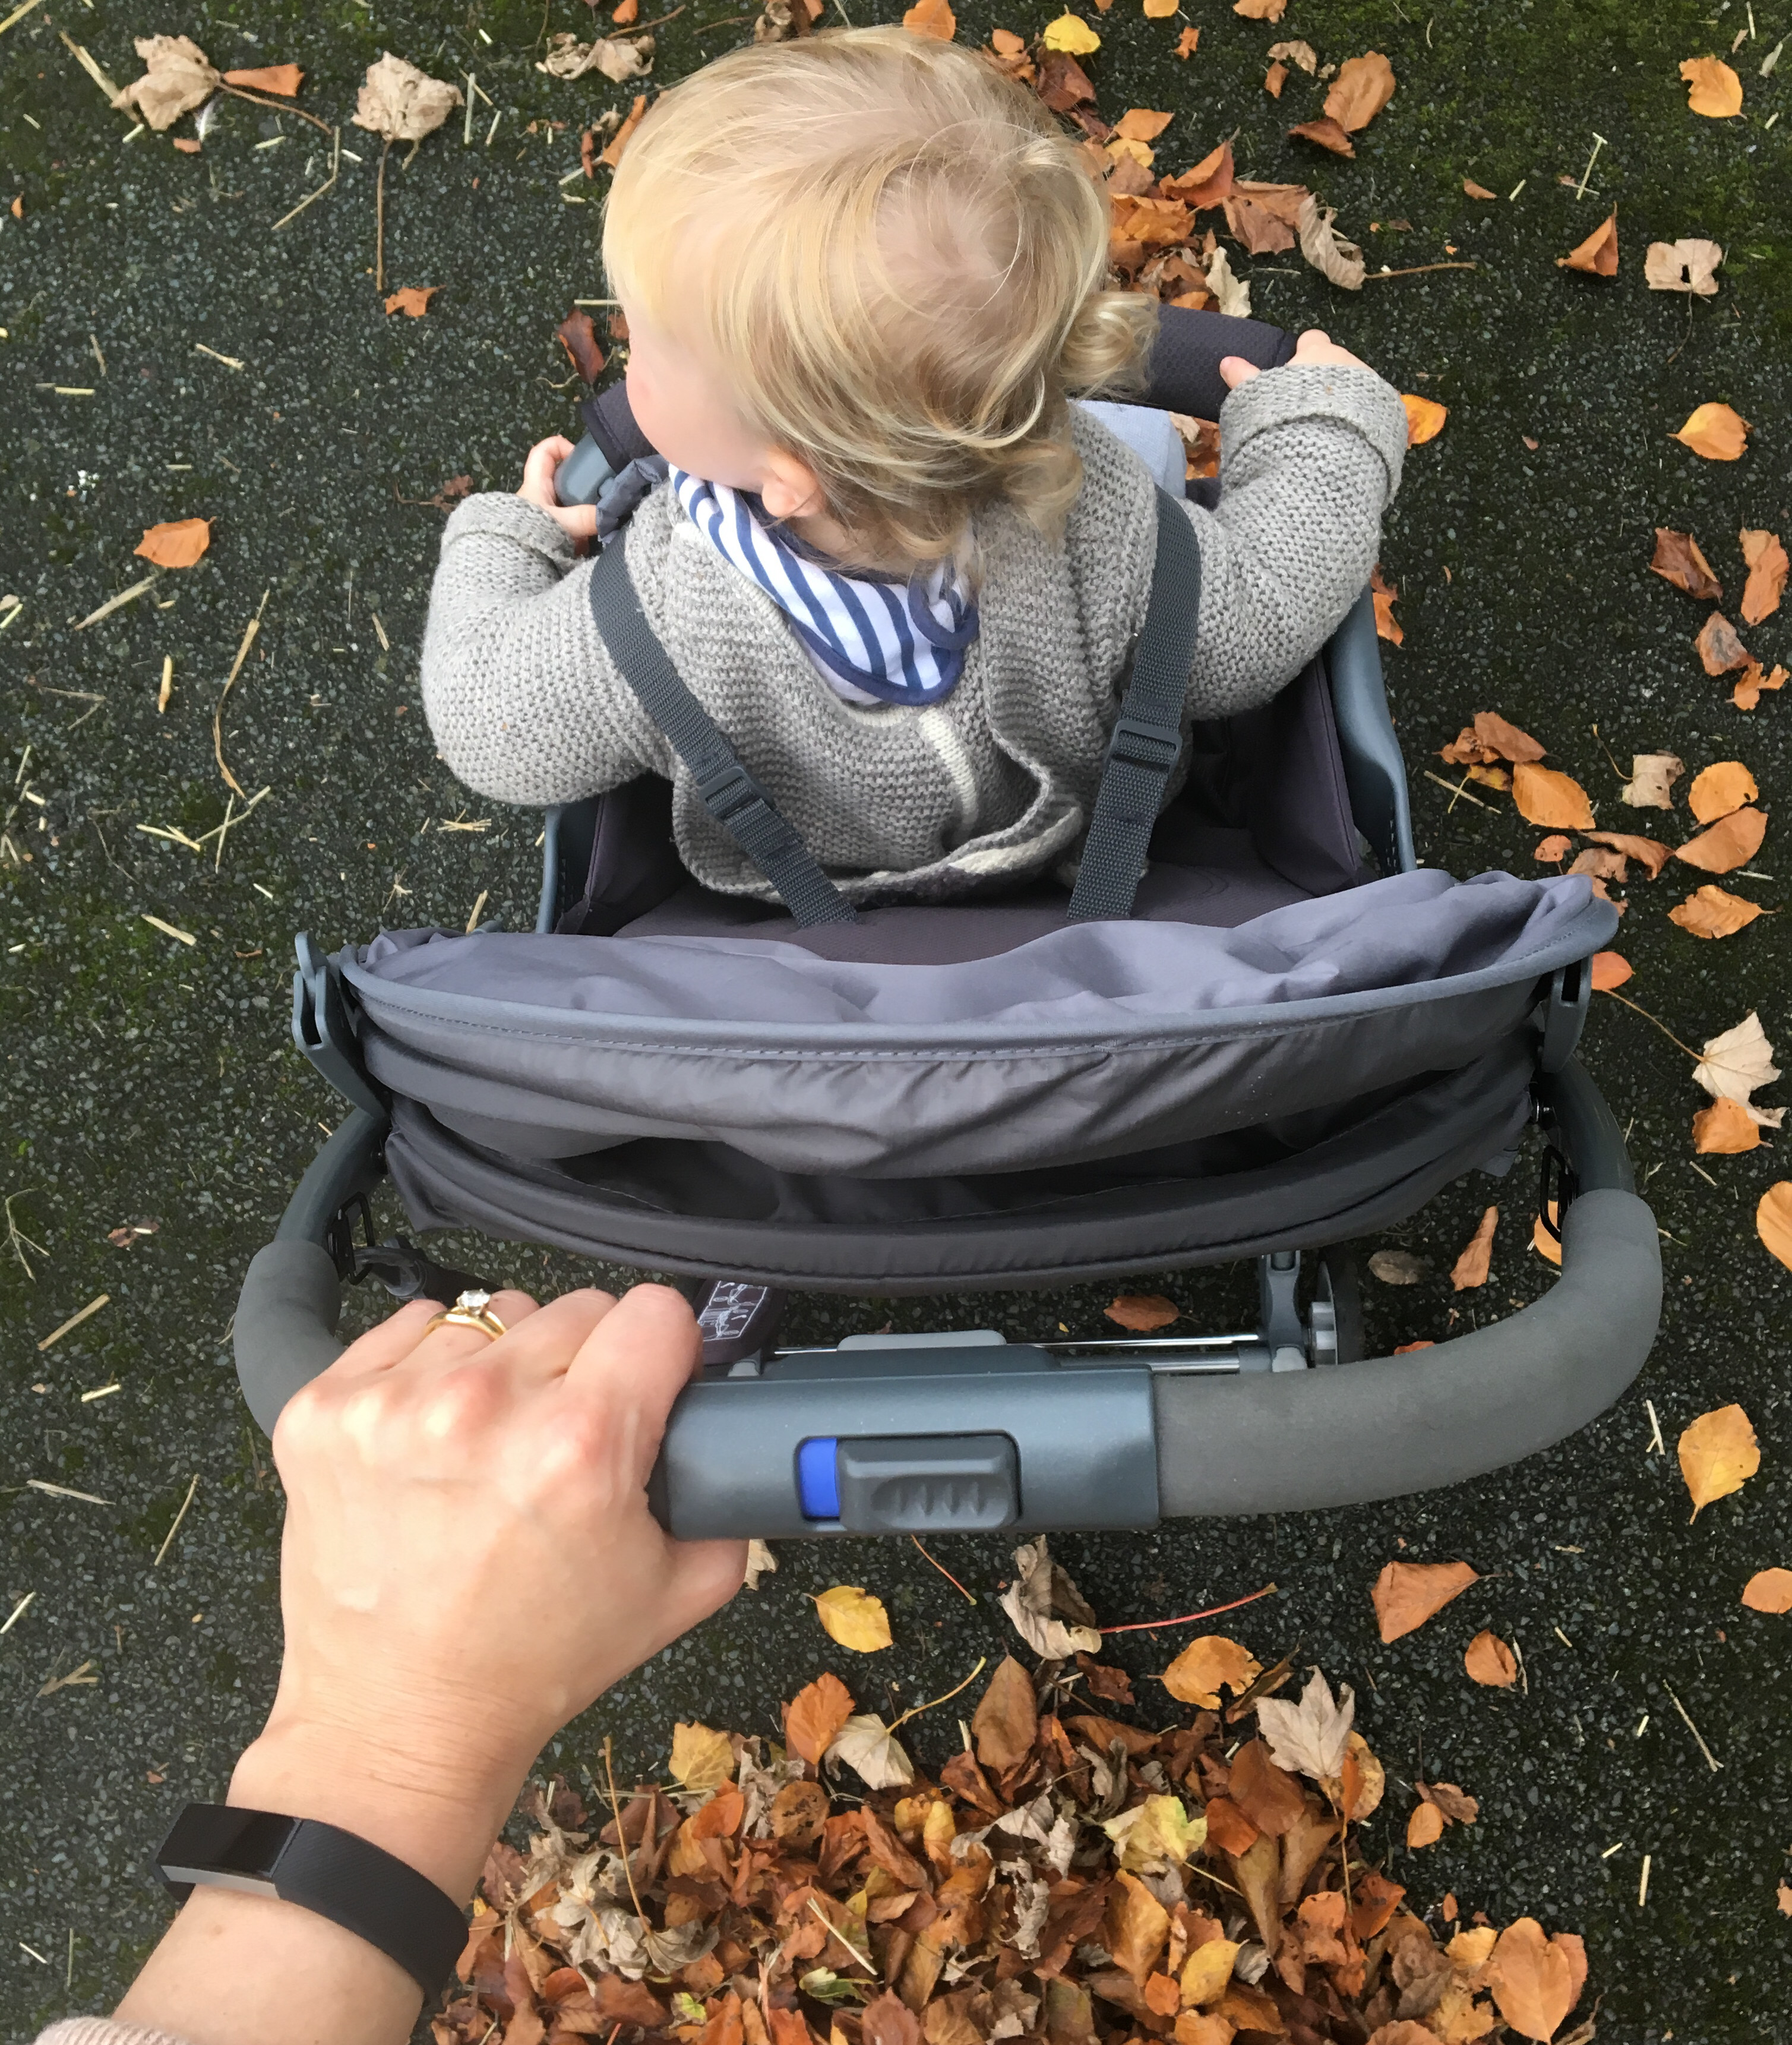 graco featherweight pushchair